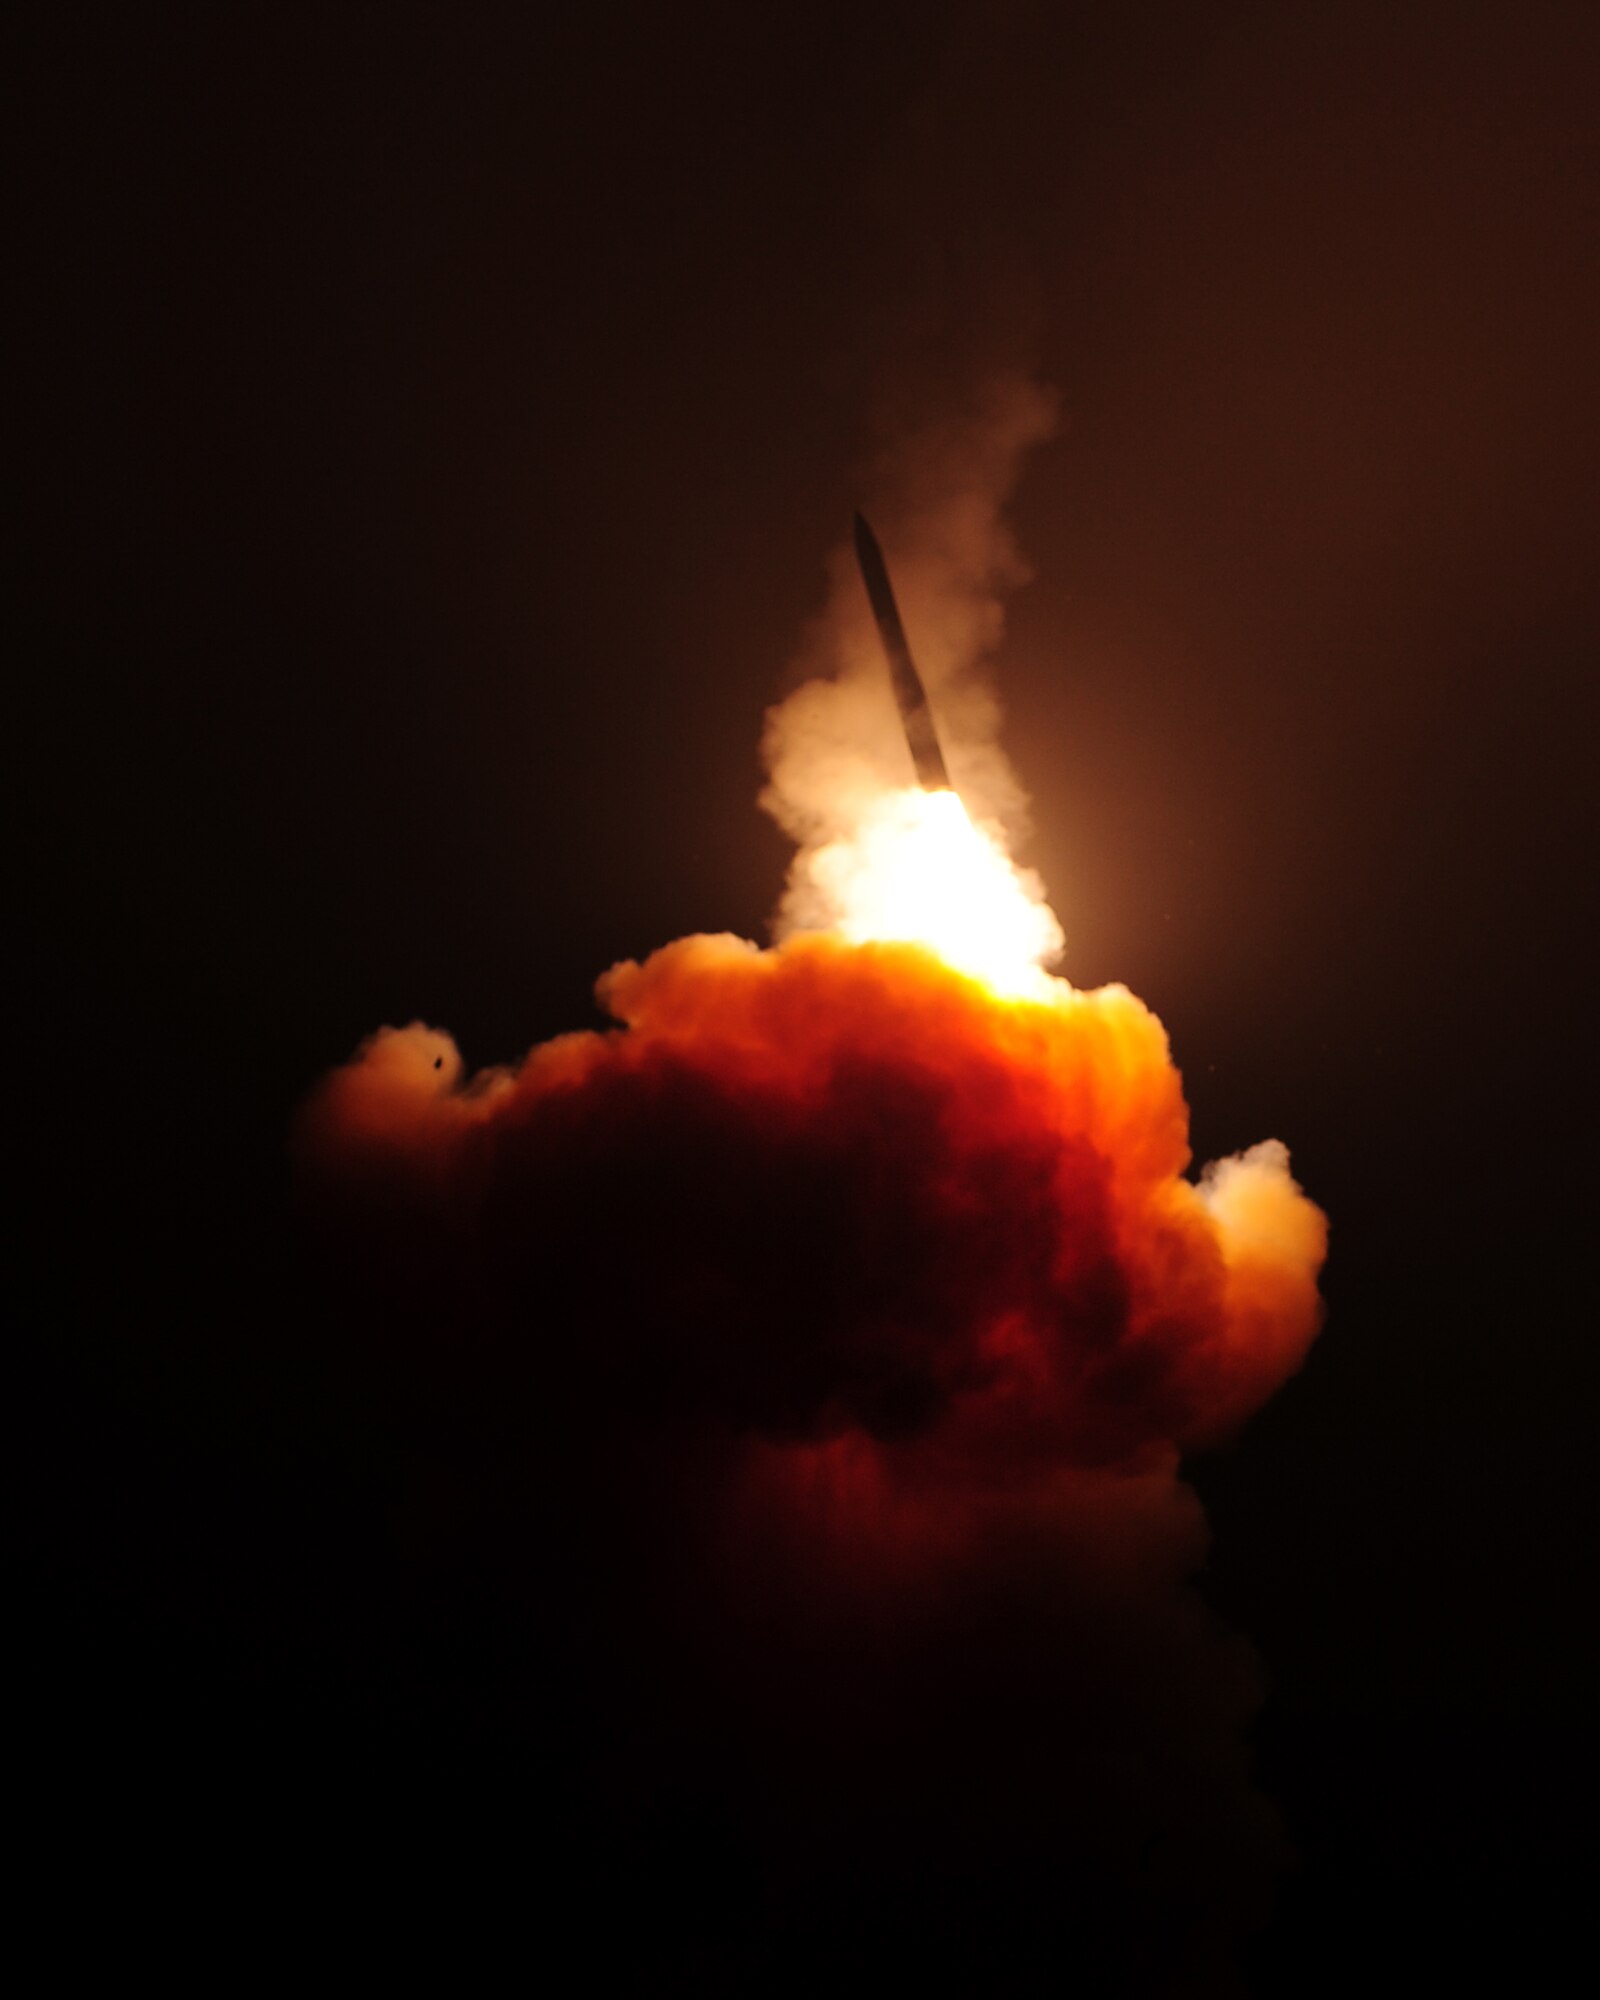 An unarmed LGM-30G Minuteman III intercontinental ballistic missile launches Aug. 19, 2015, at Vandenberg Air Force Base, Calif. The missile was randomly selected from Minot AFB, N.D. as a part of the system's operational test and evaluation program, which provides valuable data to evaluators and validates the reliability of the ICBM fleet. (U.S. Air Force photo/Joe Davila)